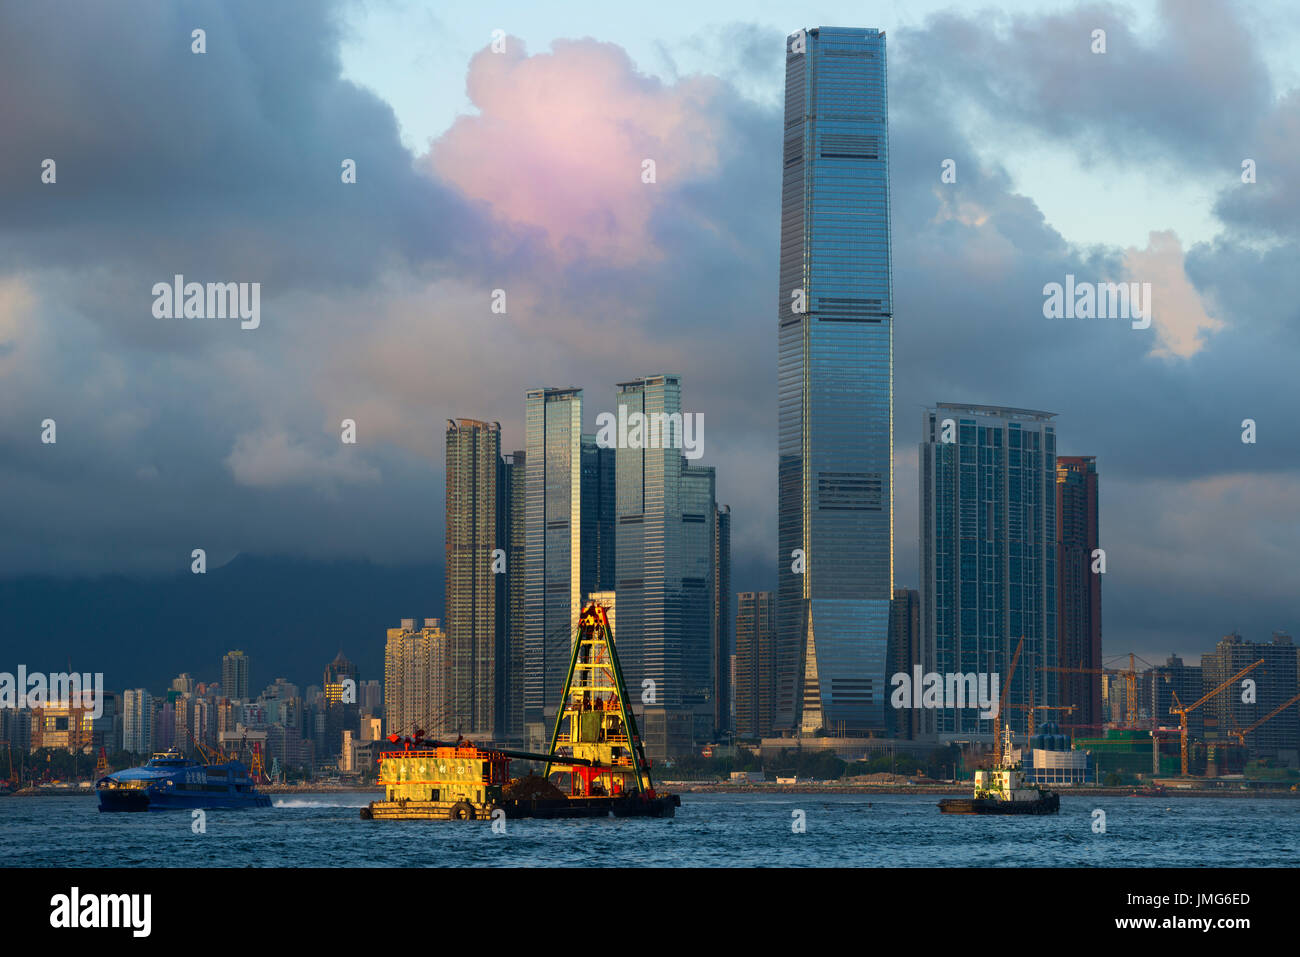 The new Kowloon skyline and Hong Kong's tallest building, The International Commerce Center ICC, Hong Kong, China. Stock Photo